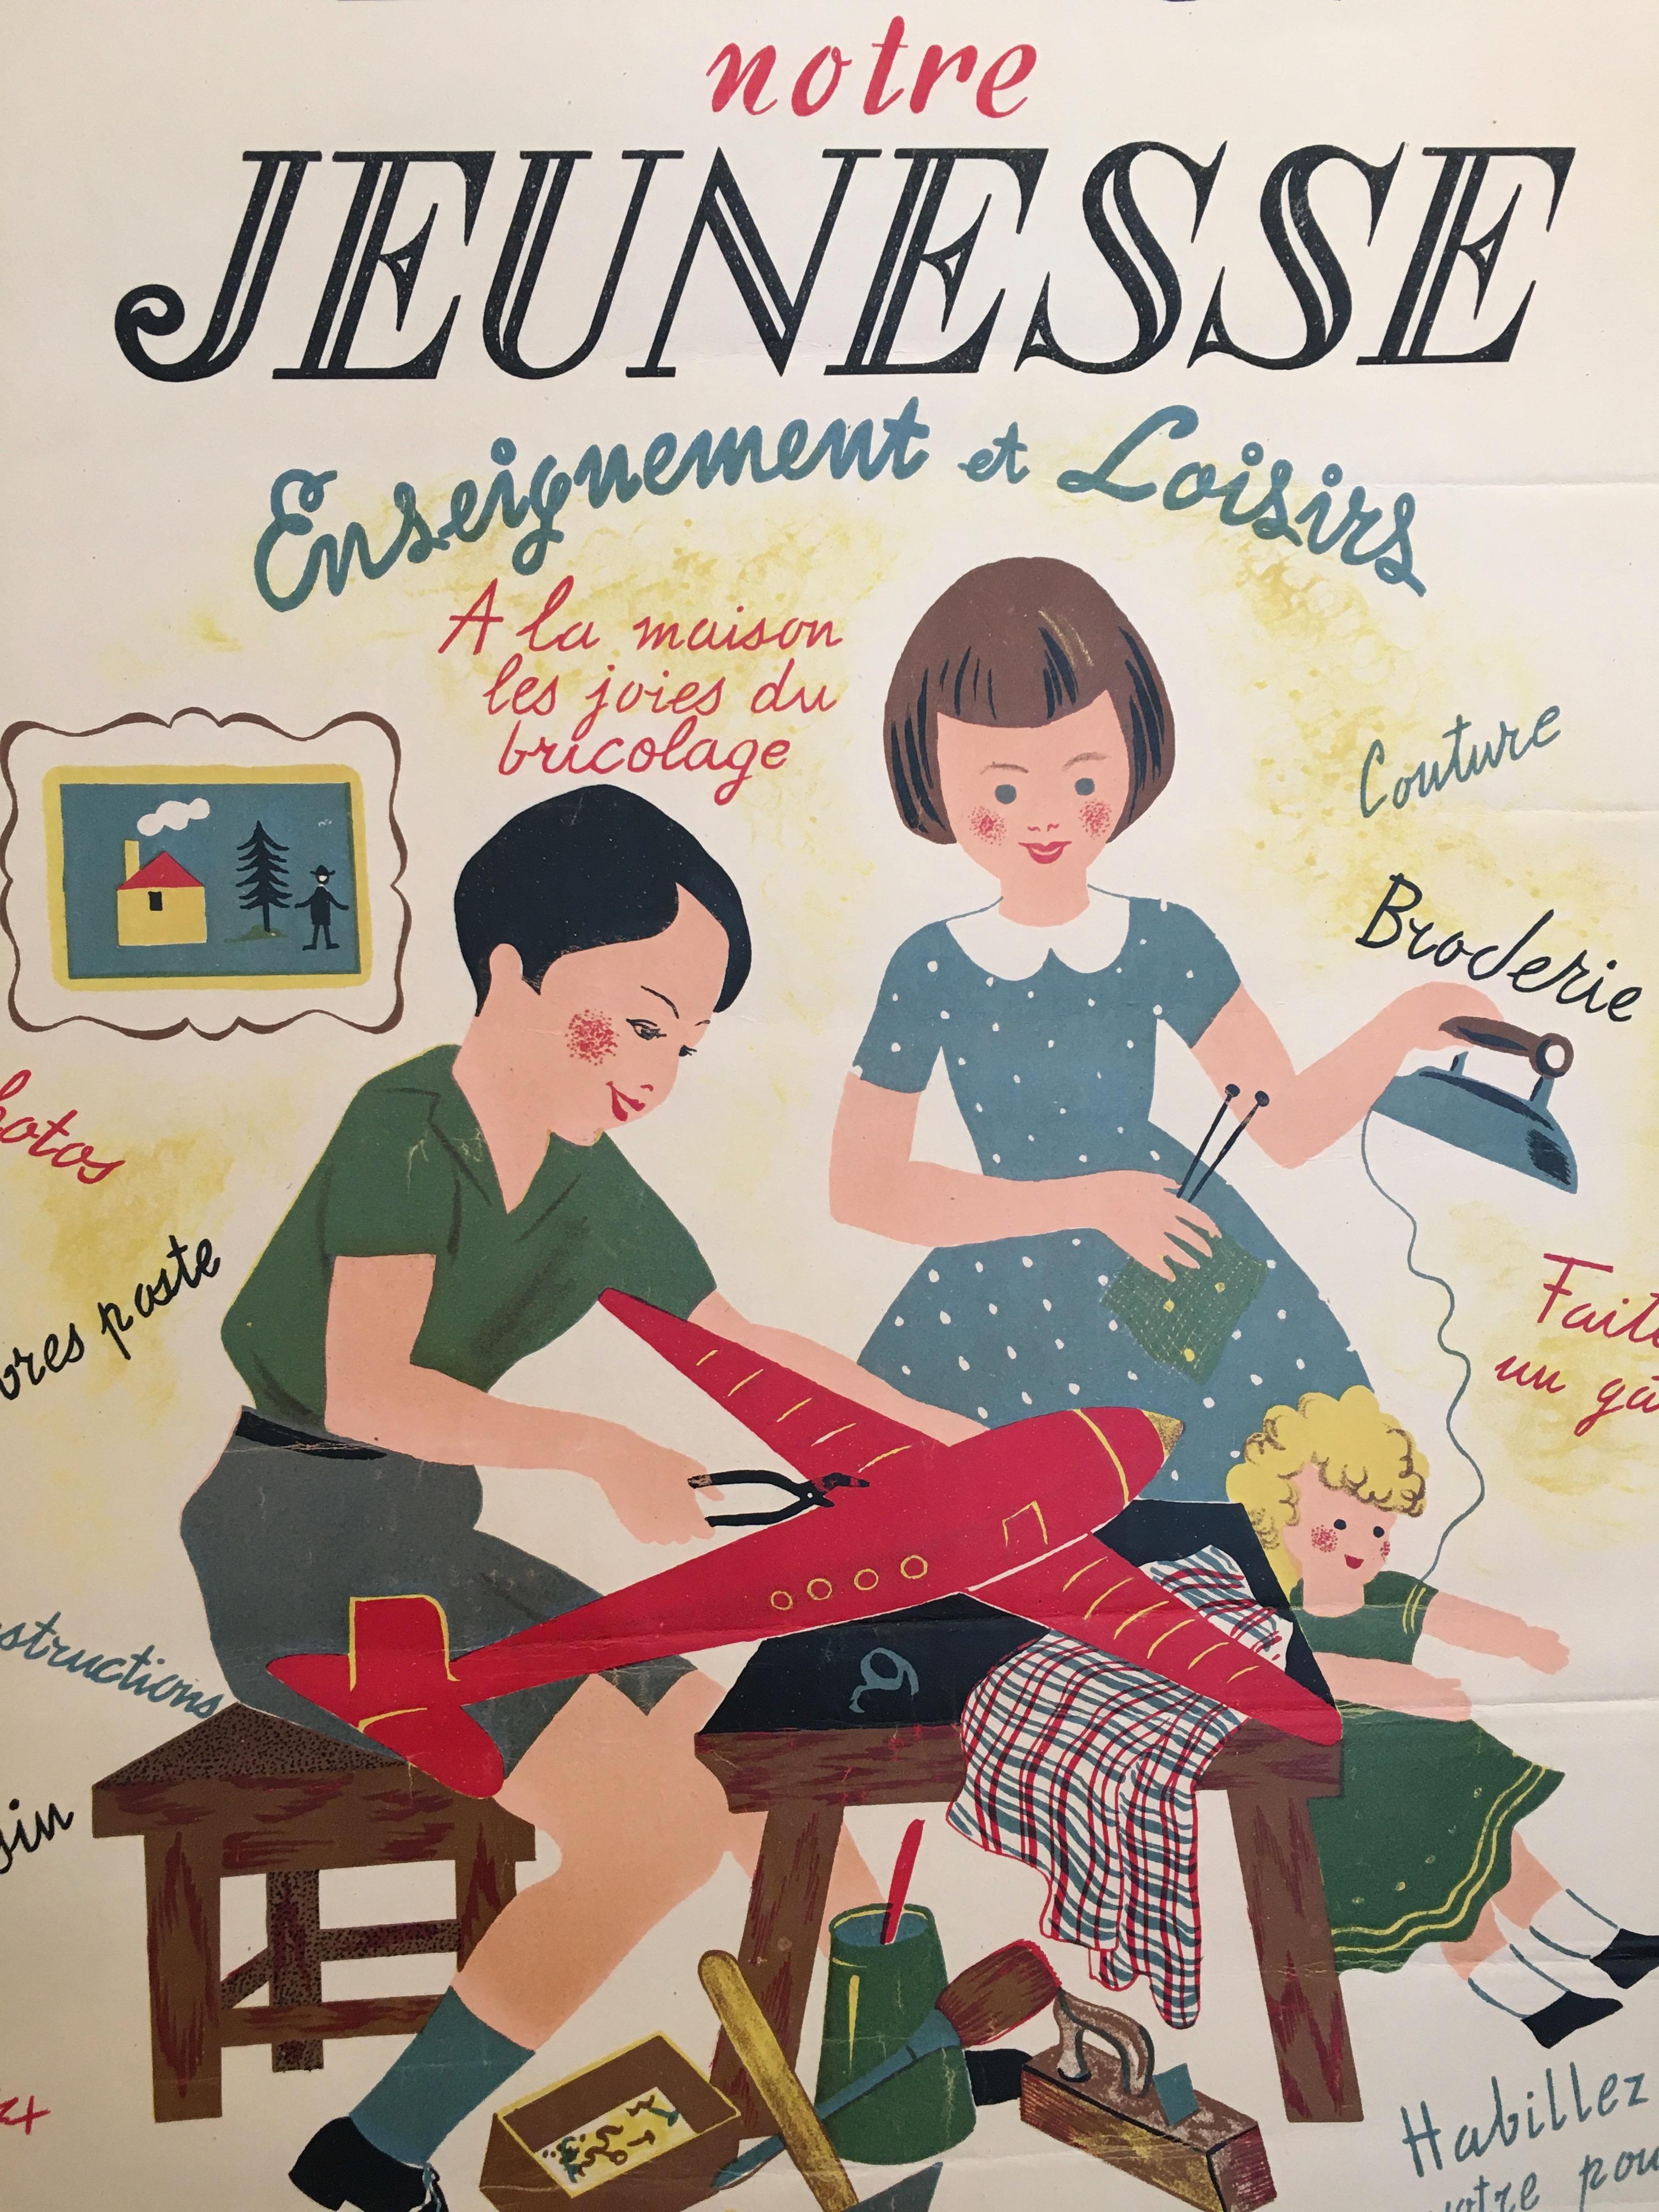 Original vintage French children's Art Deco poster, 'Exposition Notre', 1935

A charming poster from the Art Deco period, featuring two children playing with their new toys. Poster has some slight signs of